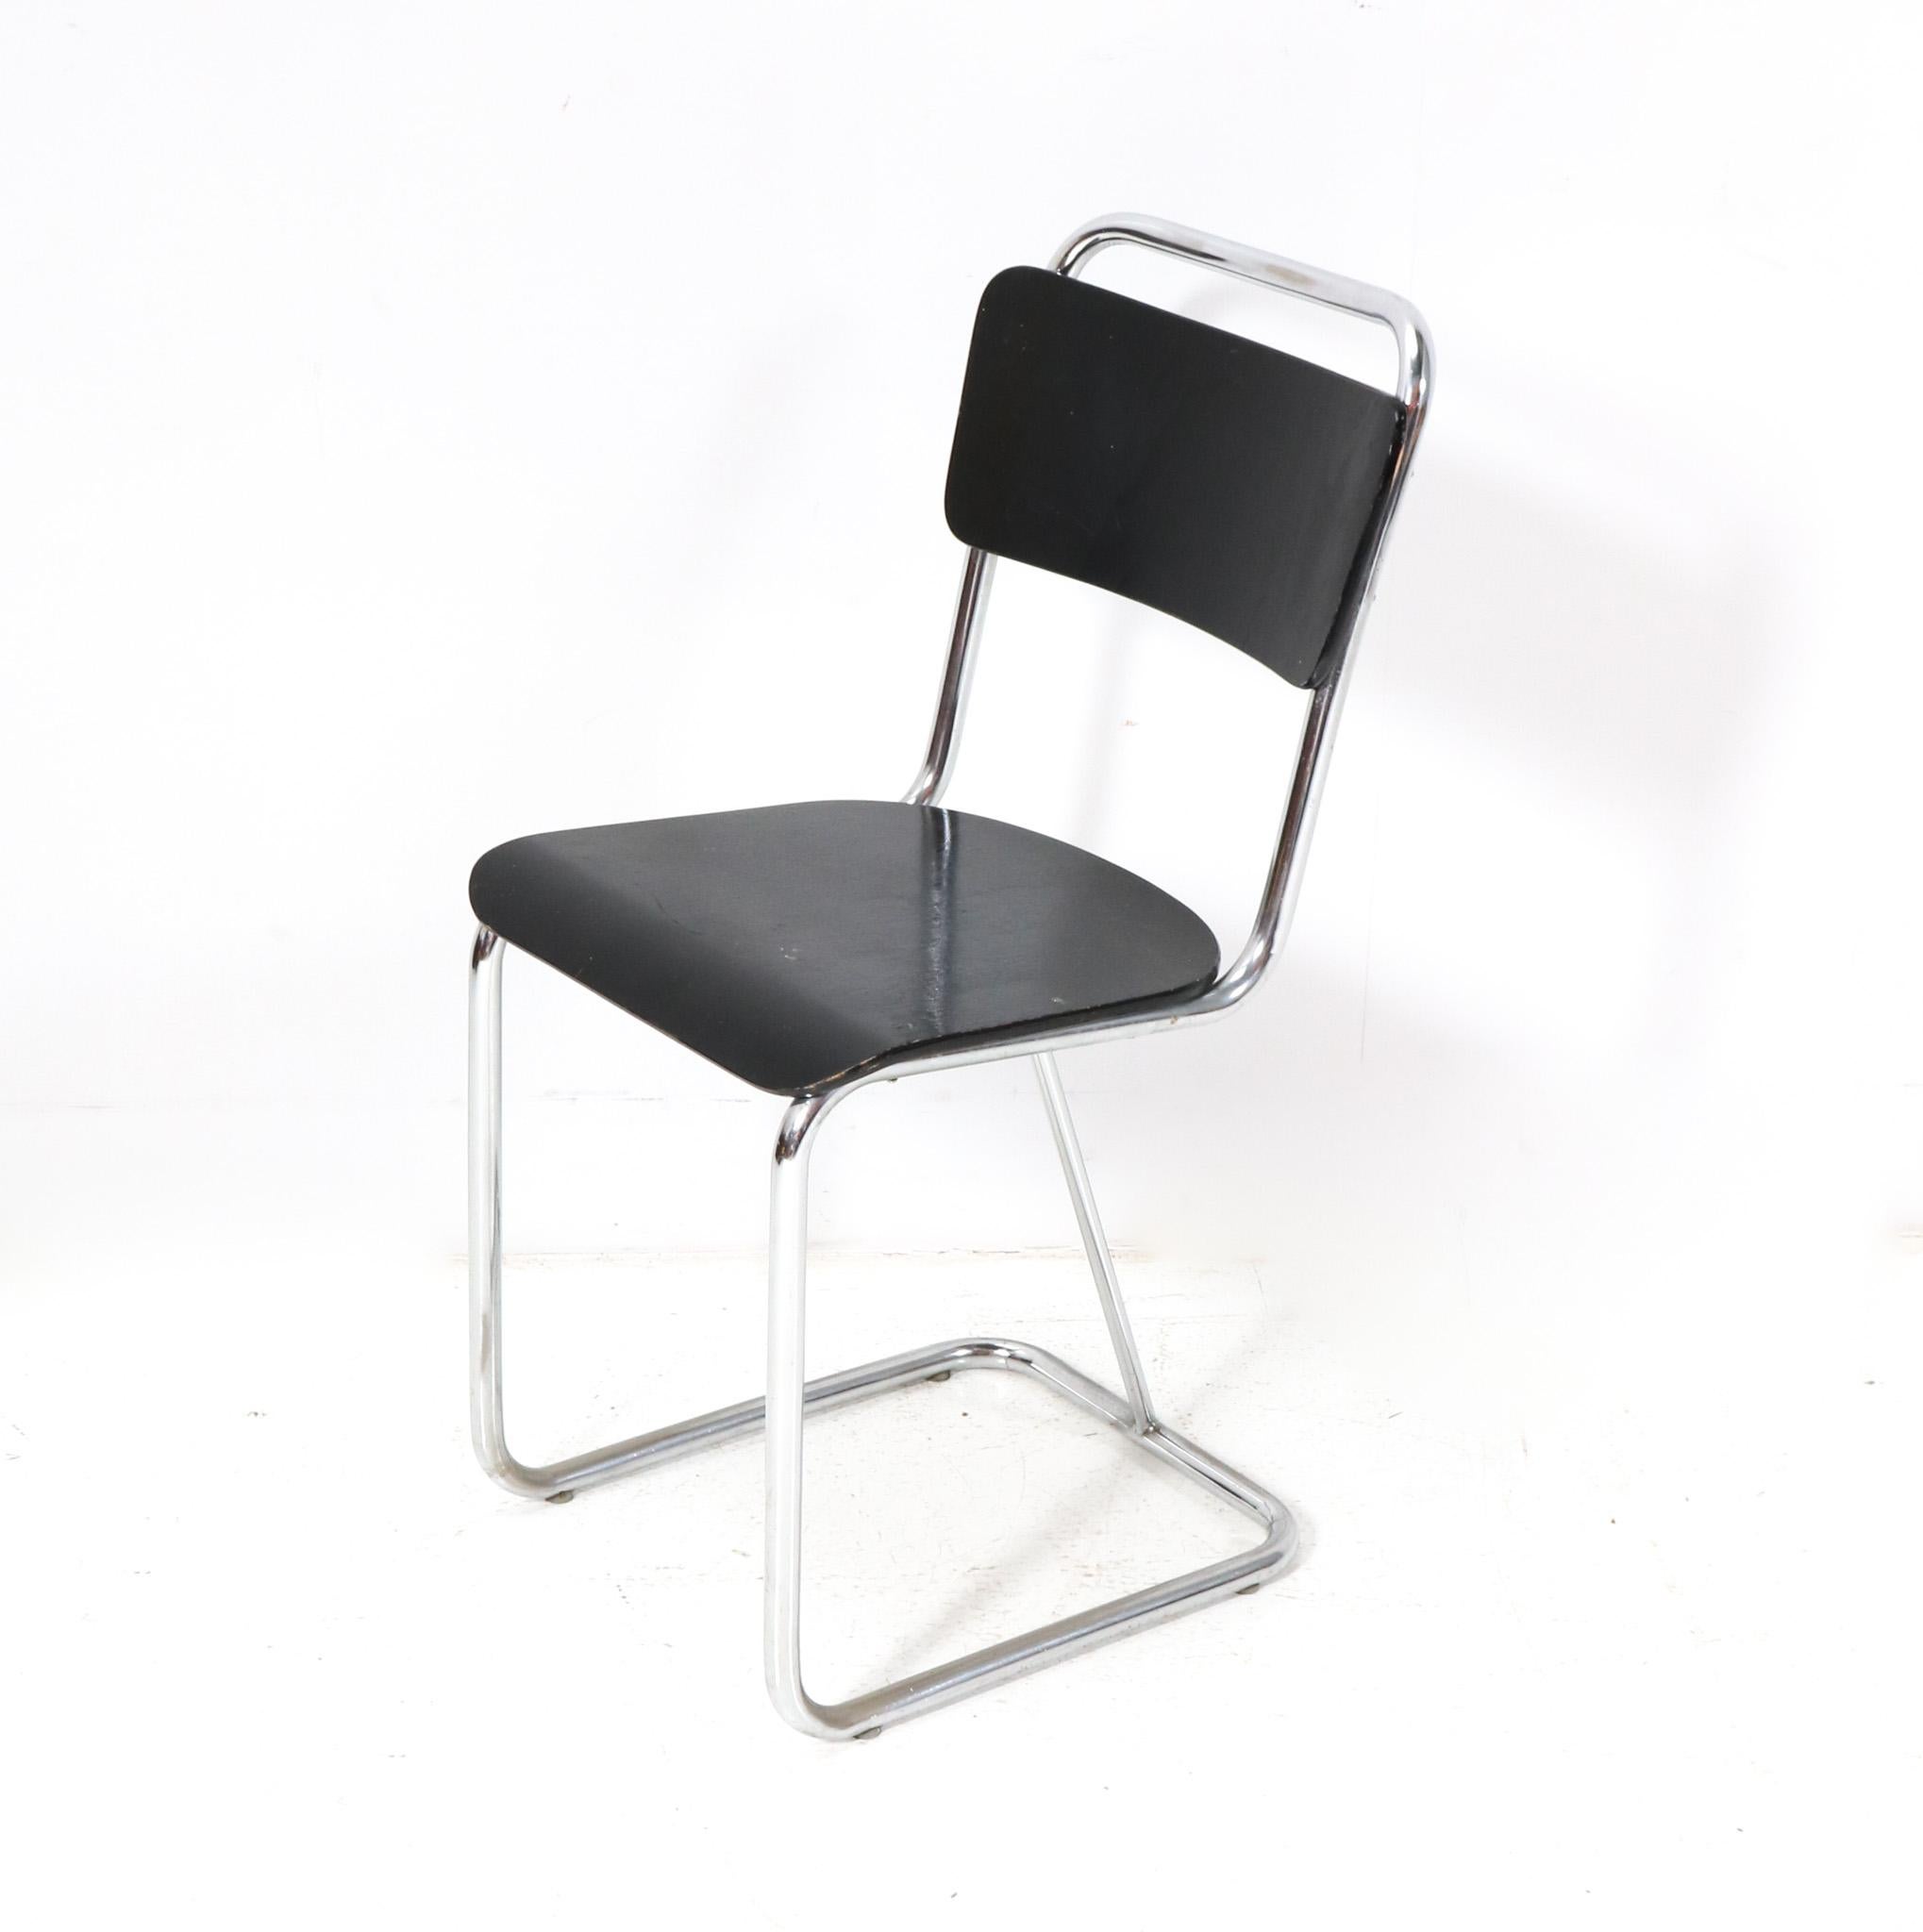 Stunning and elegant Rationalist Bauhaus side chair.
Striking Dutch design from the 1930s.
Chrome tubular steel frame with original black lacquered back and seat.
This wonderful Rationalist Bauhaus side chair is in good condition with minor wear